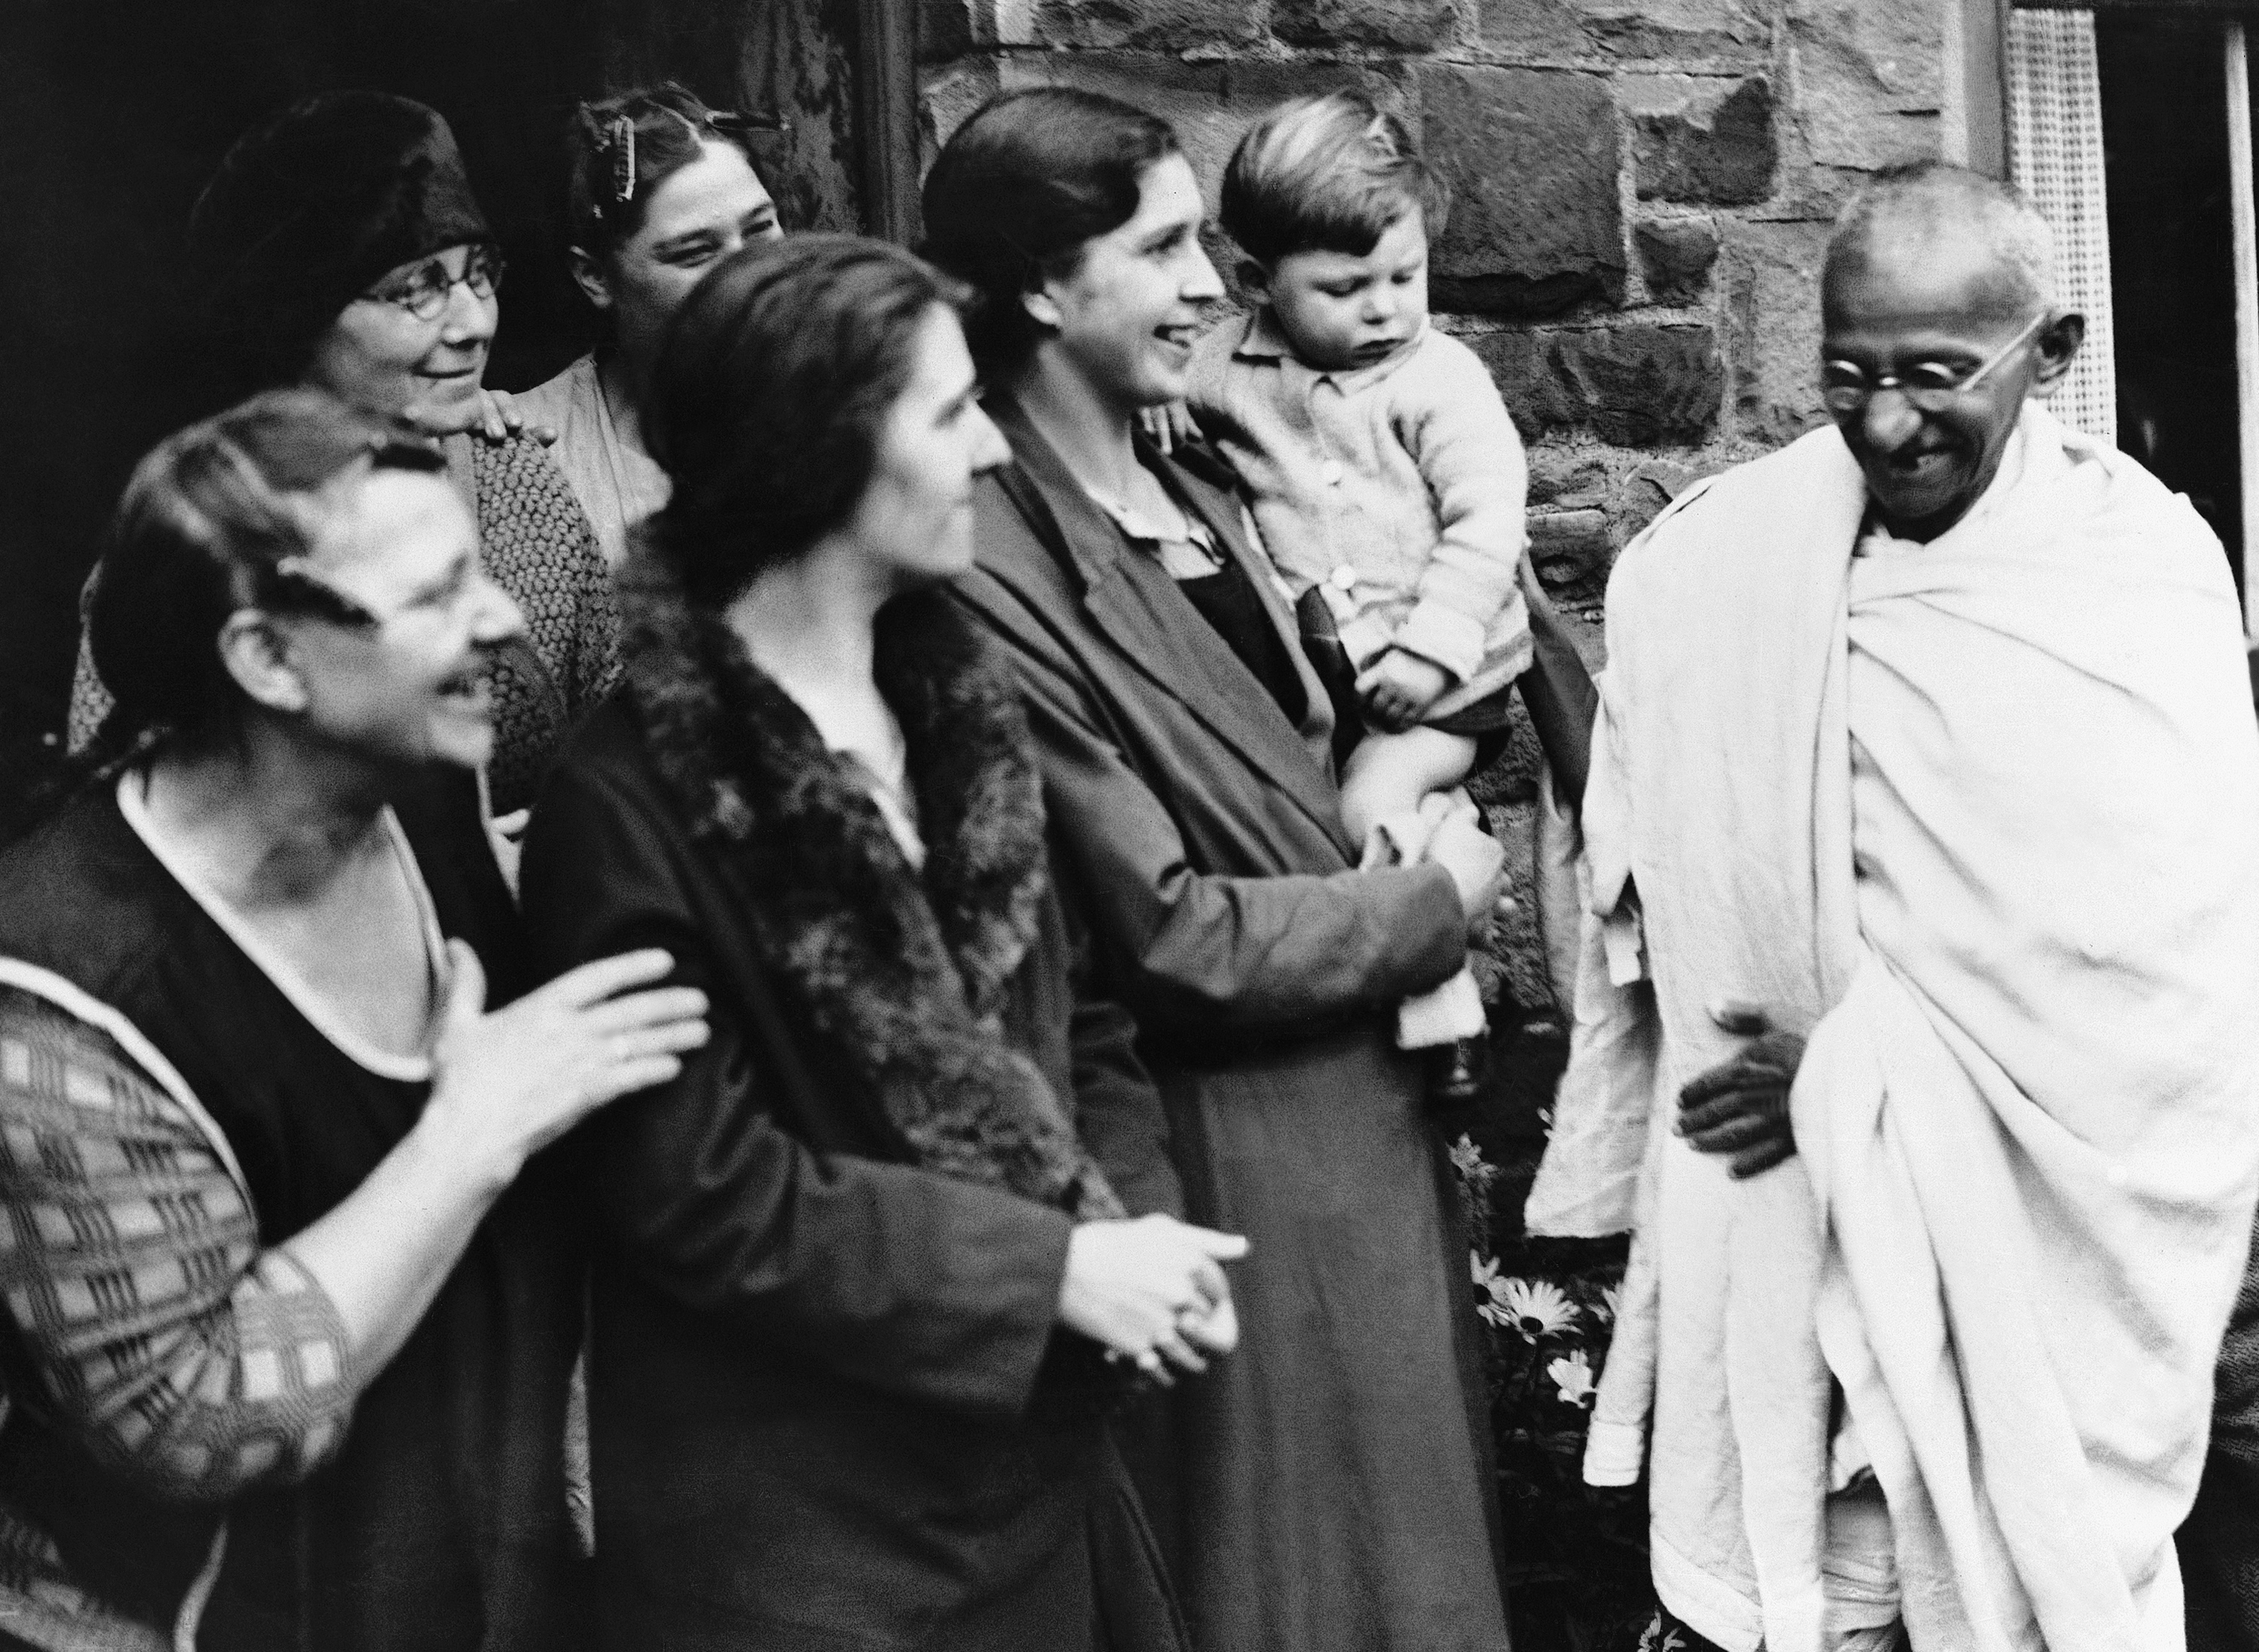 Mohandas Karamchand Gandhi visiting the workers in their cottages at Spring Vale, England on Sept. 26, 1931, during his inspection of the Lancashire Cotton industry's labour conditions.  (AP Photo/Staff/Puttnam)